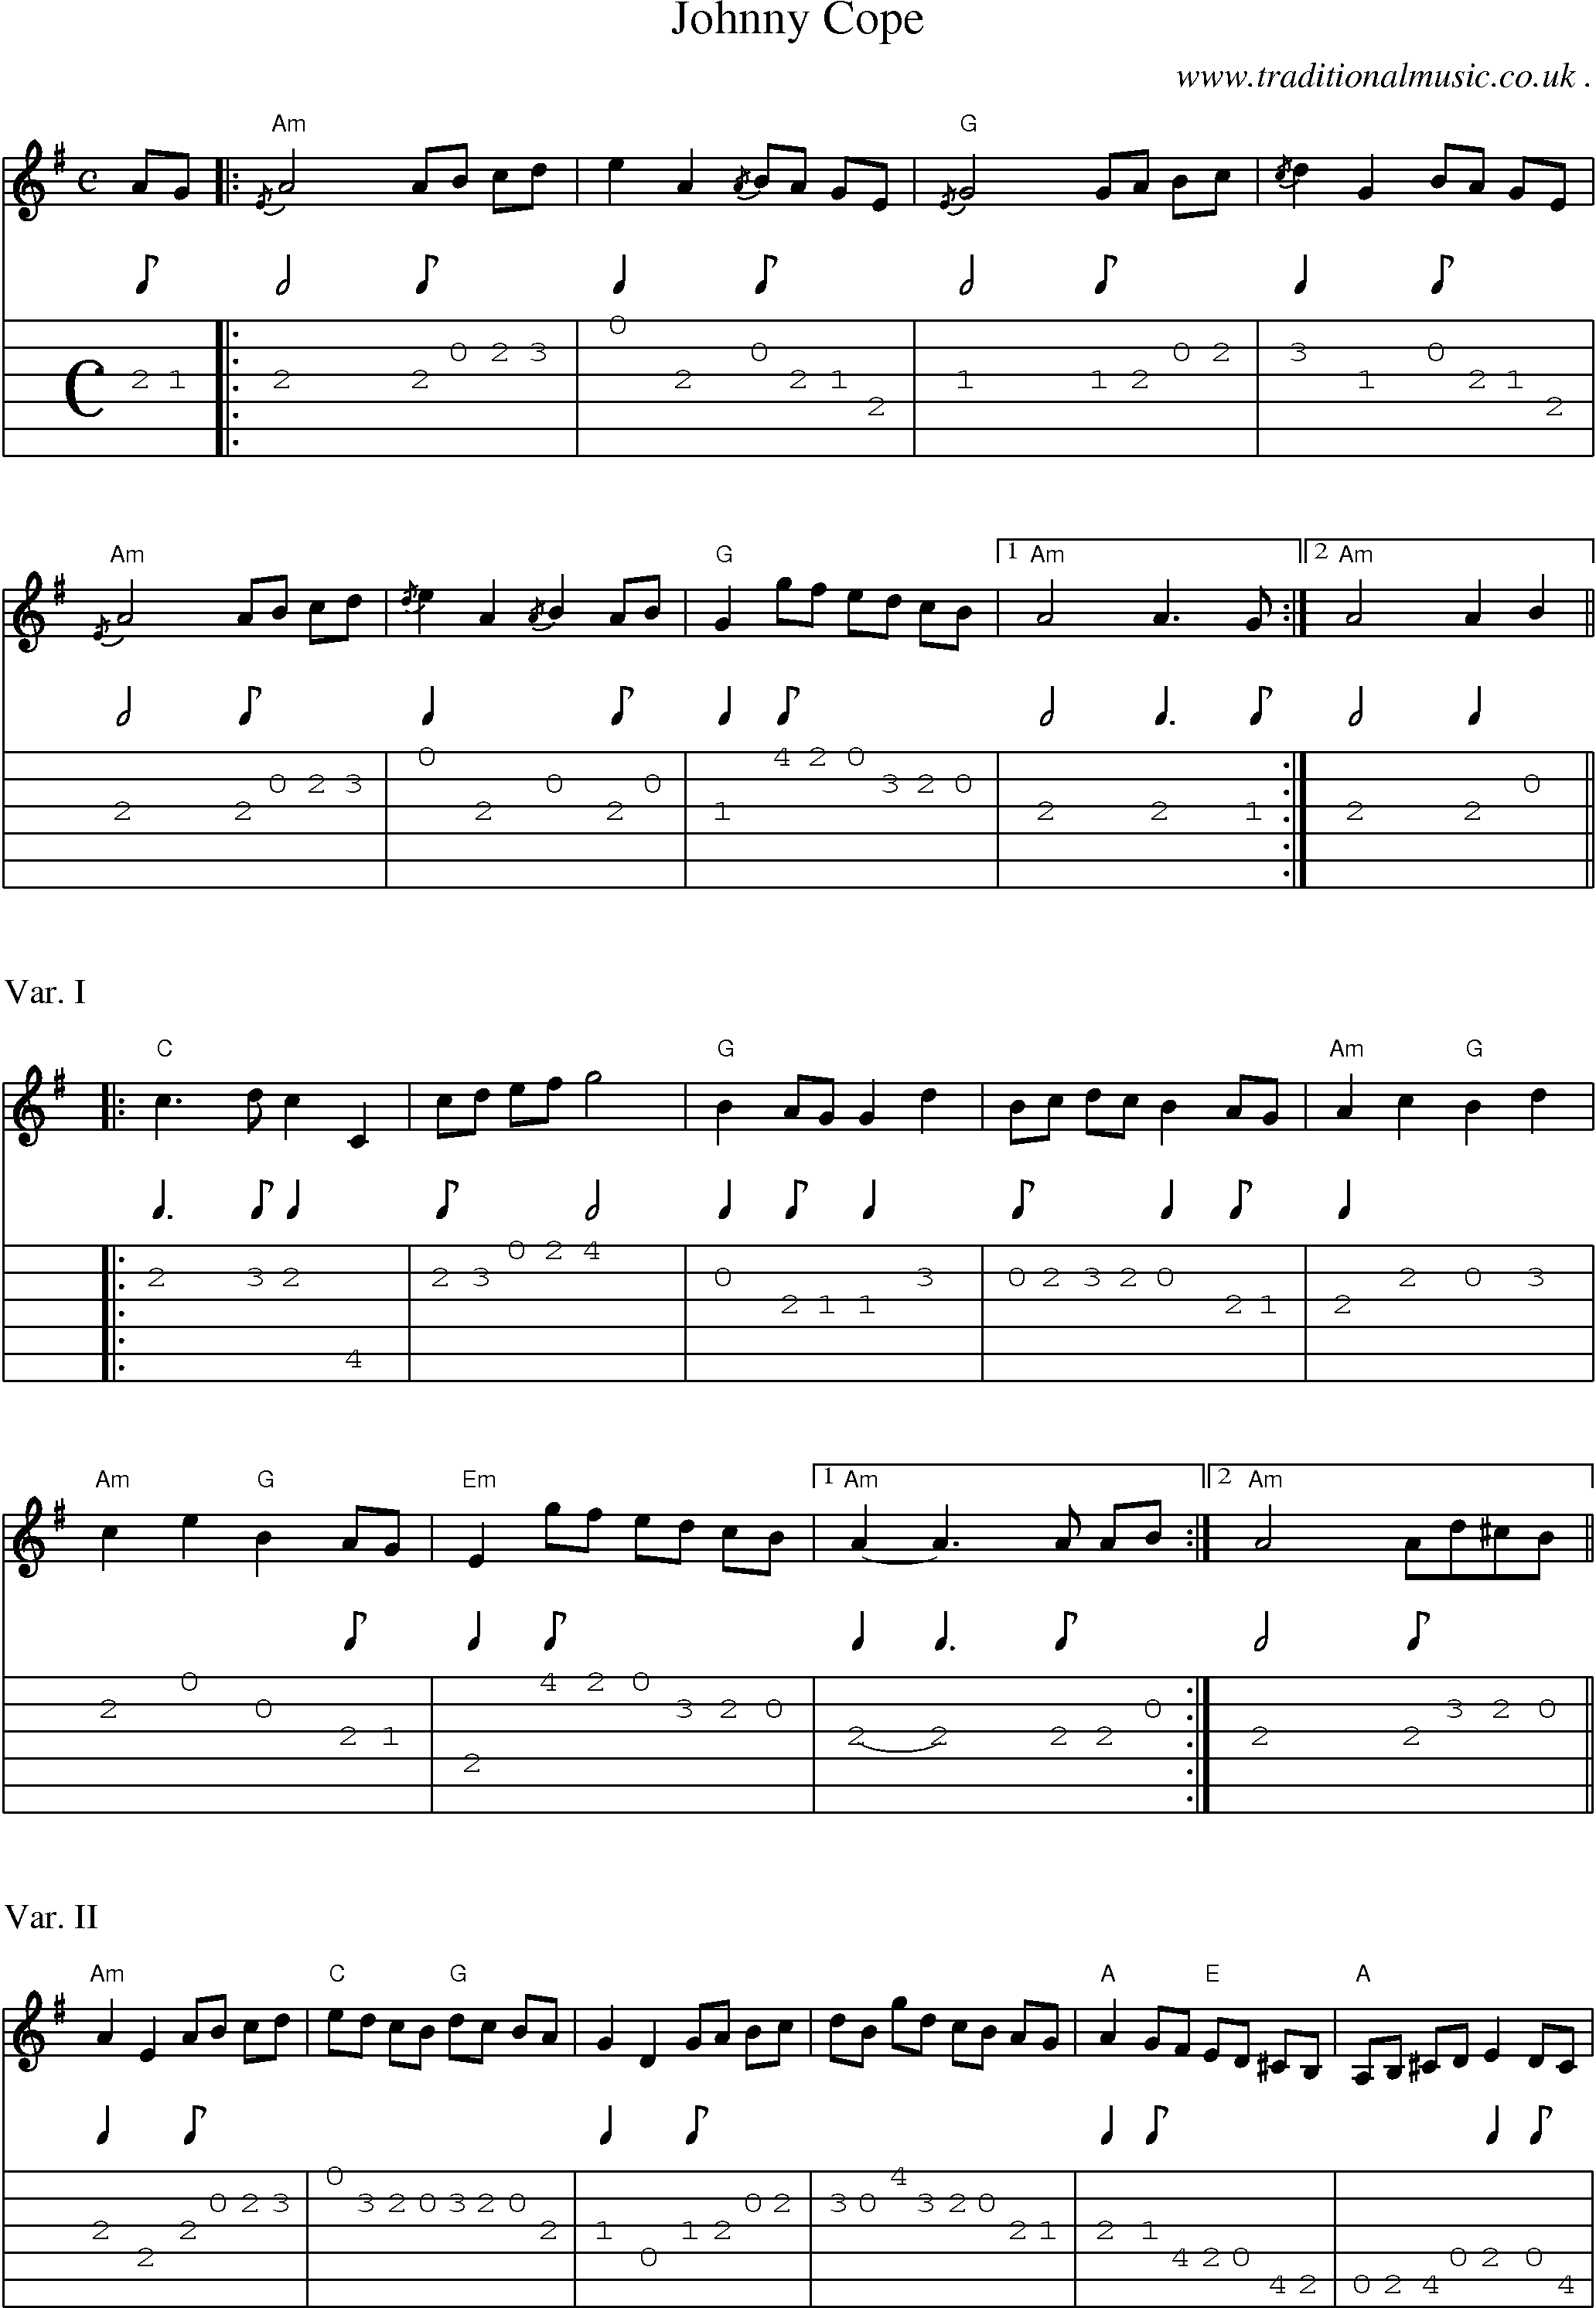 Sheet-music  score, Chords and Guitar Tabs for Johnny Cope